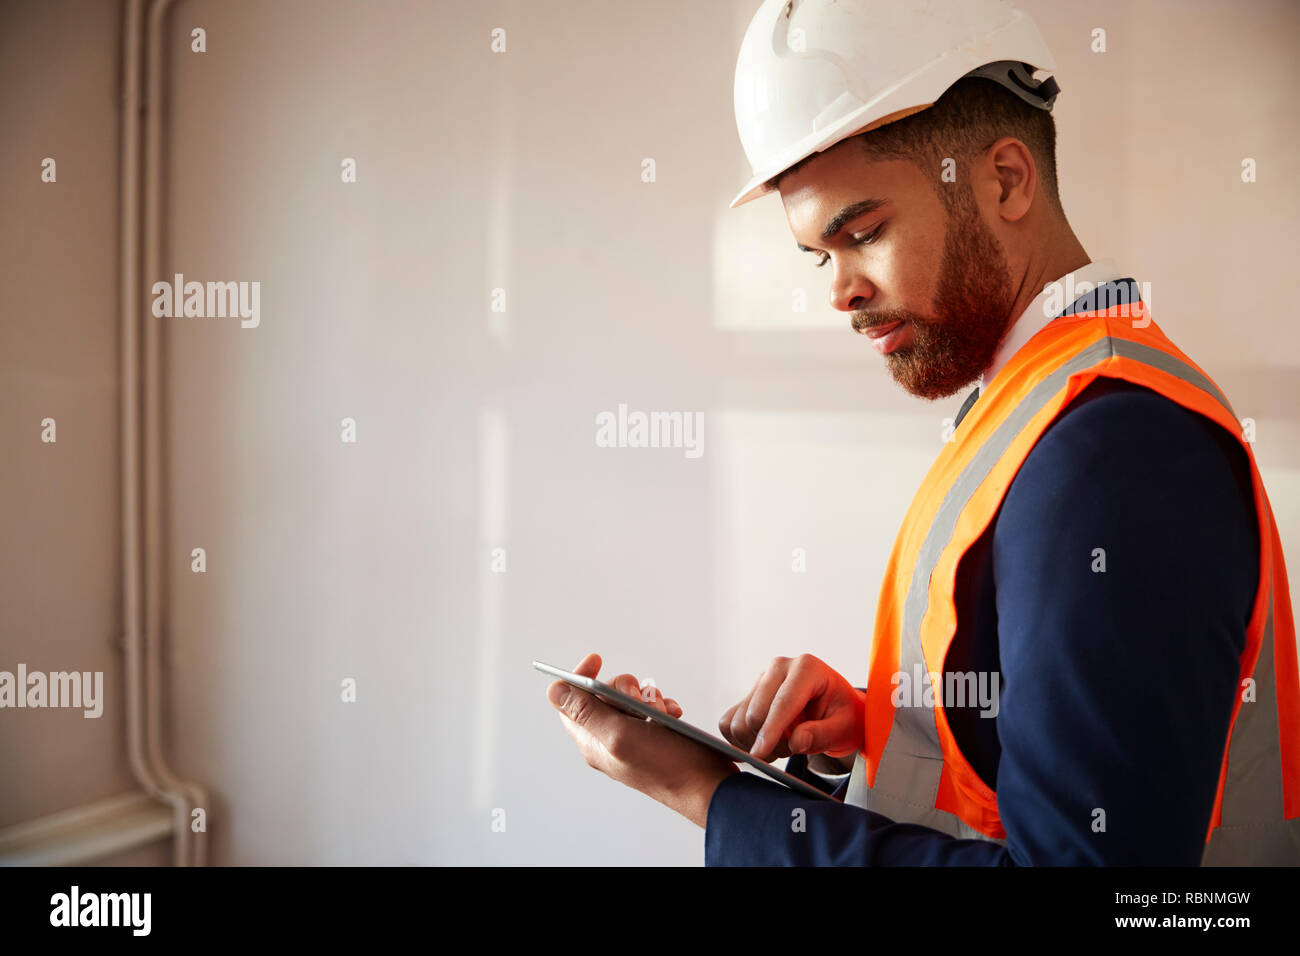 Surveyor In Hard Hat And High Visibility Jacket With Digital Tablet Carrying Out House Inspection Stock Photo